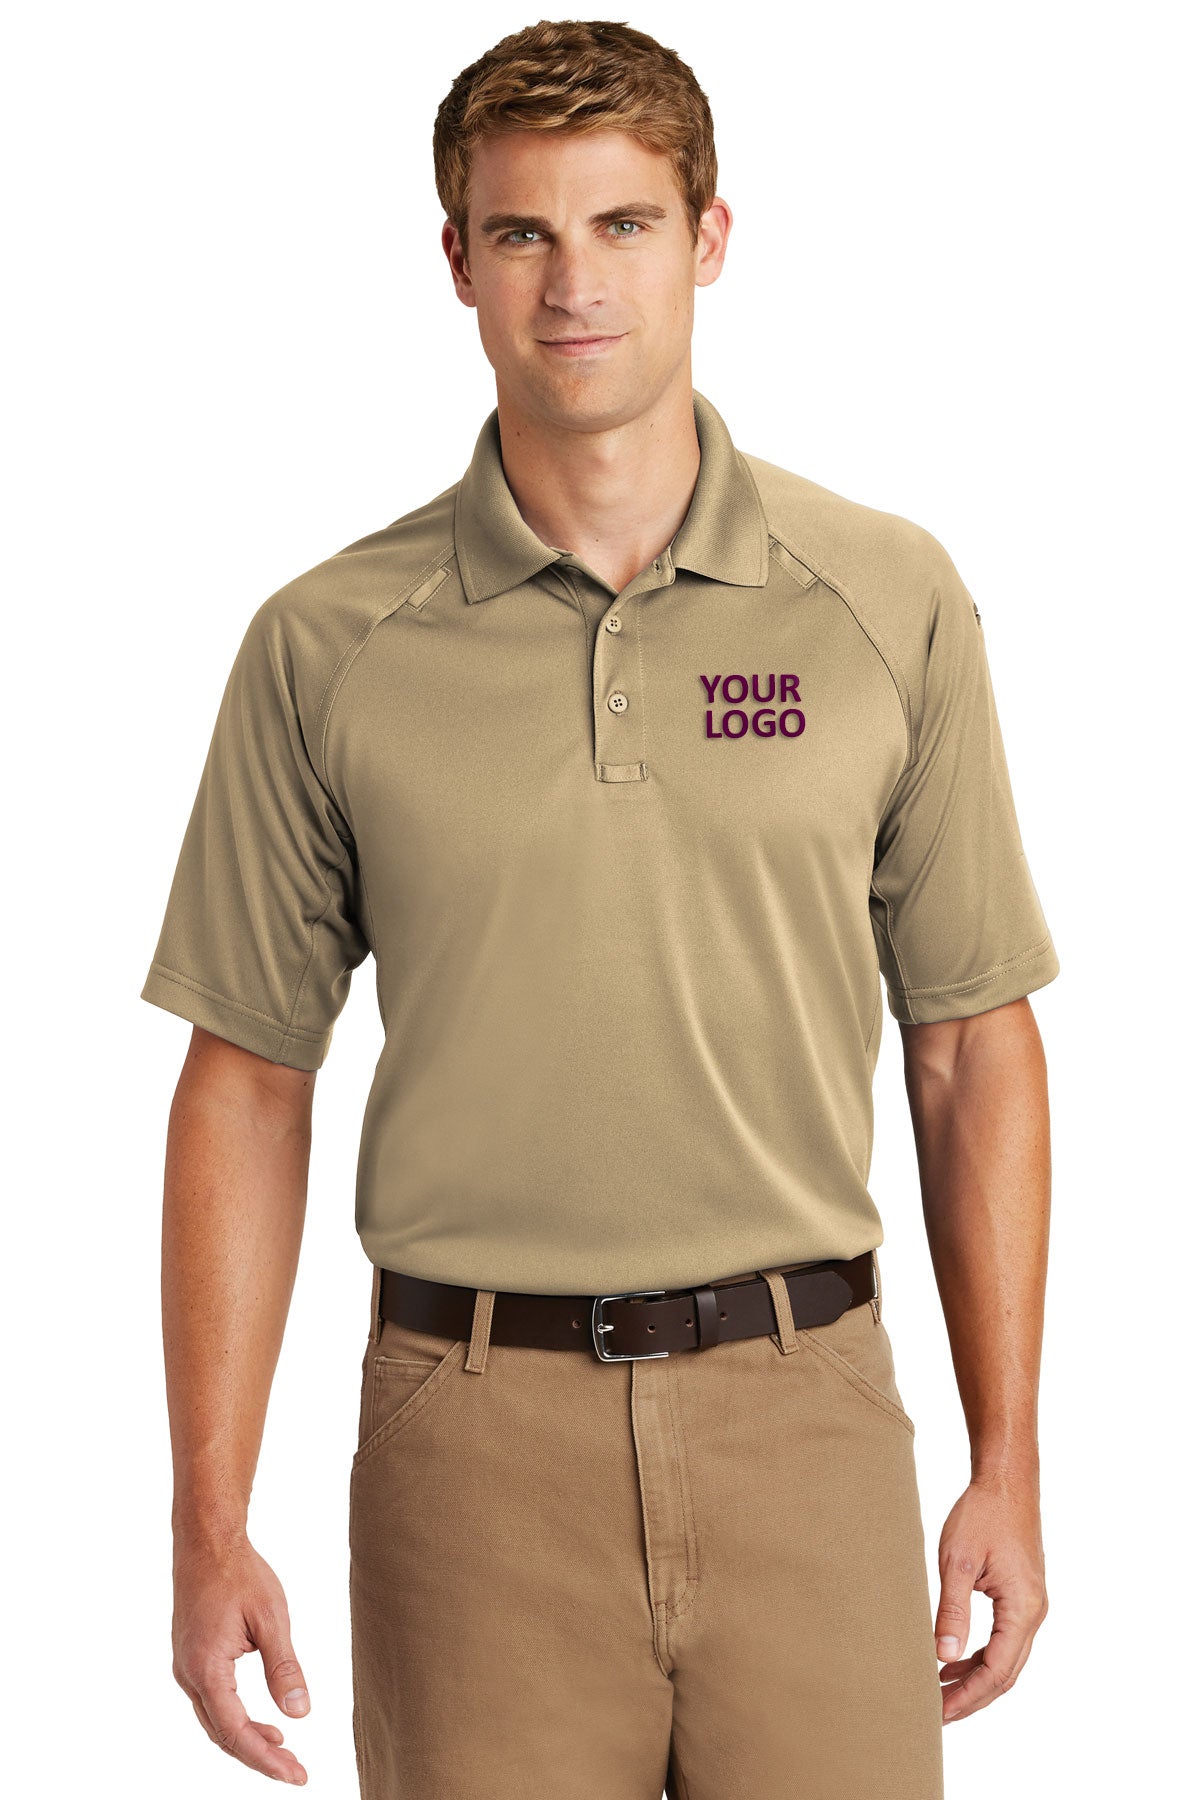 CornerStone Tan CS410 embroidered polo shirts for business